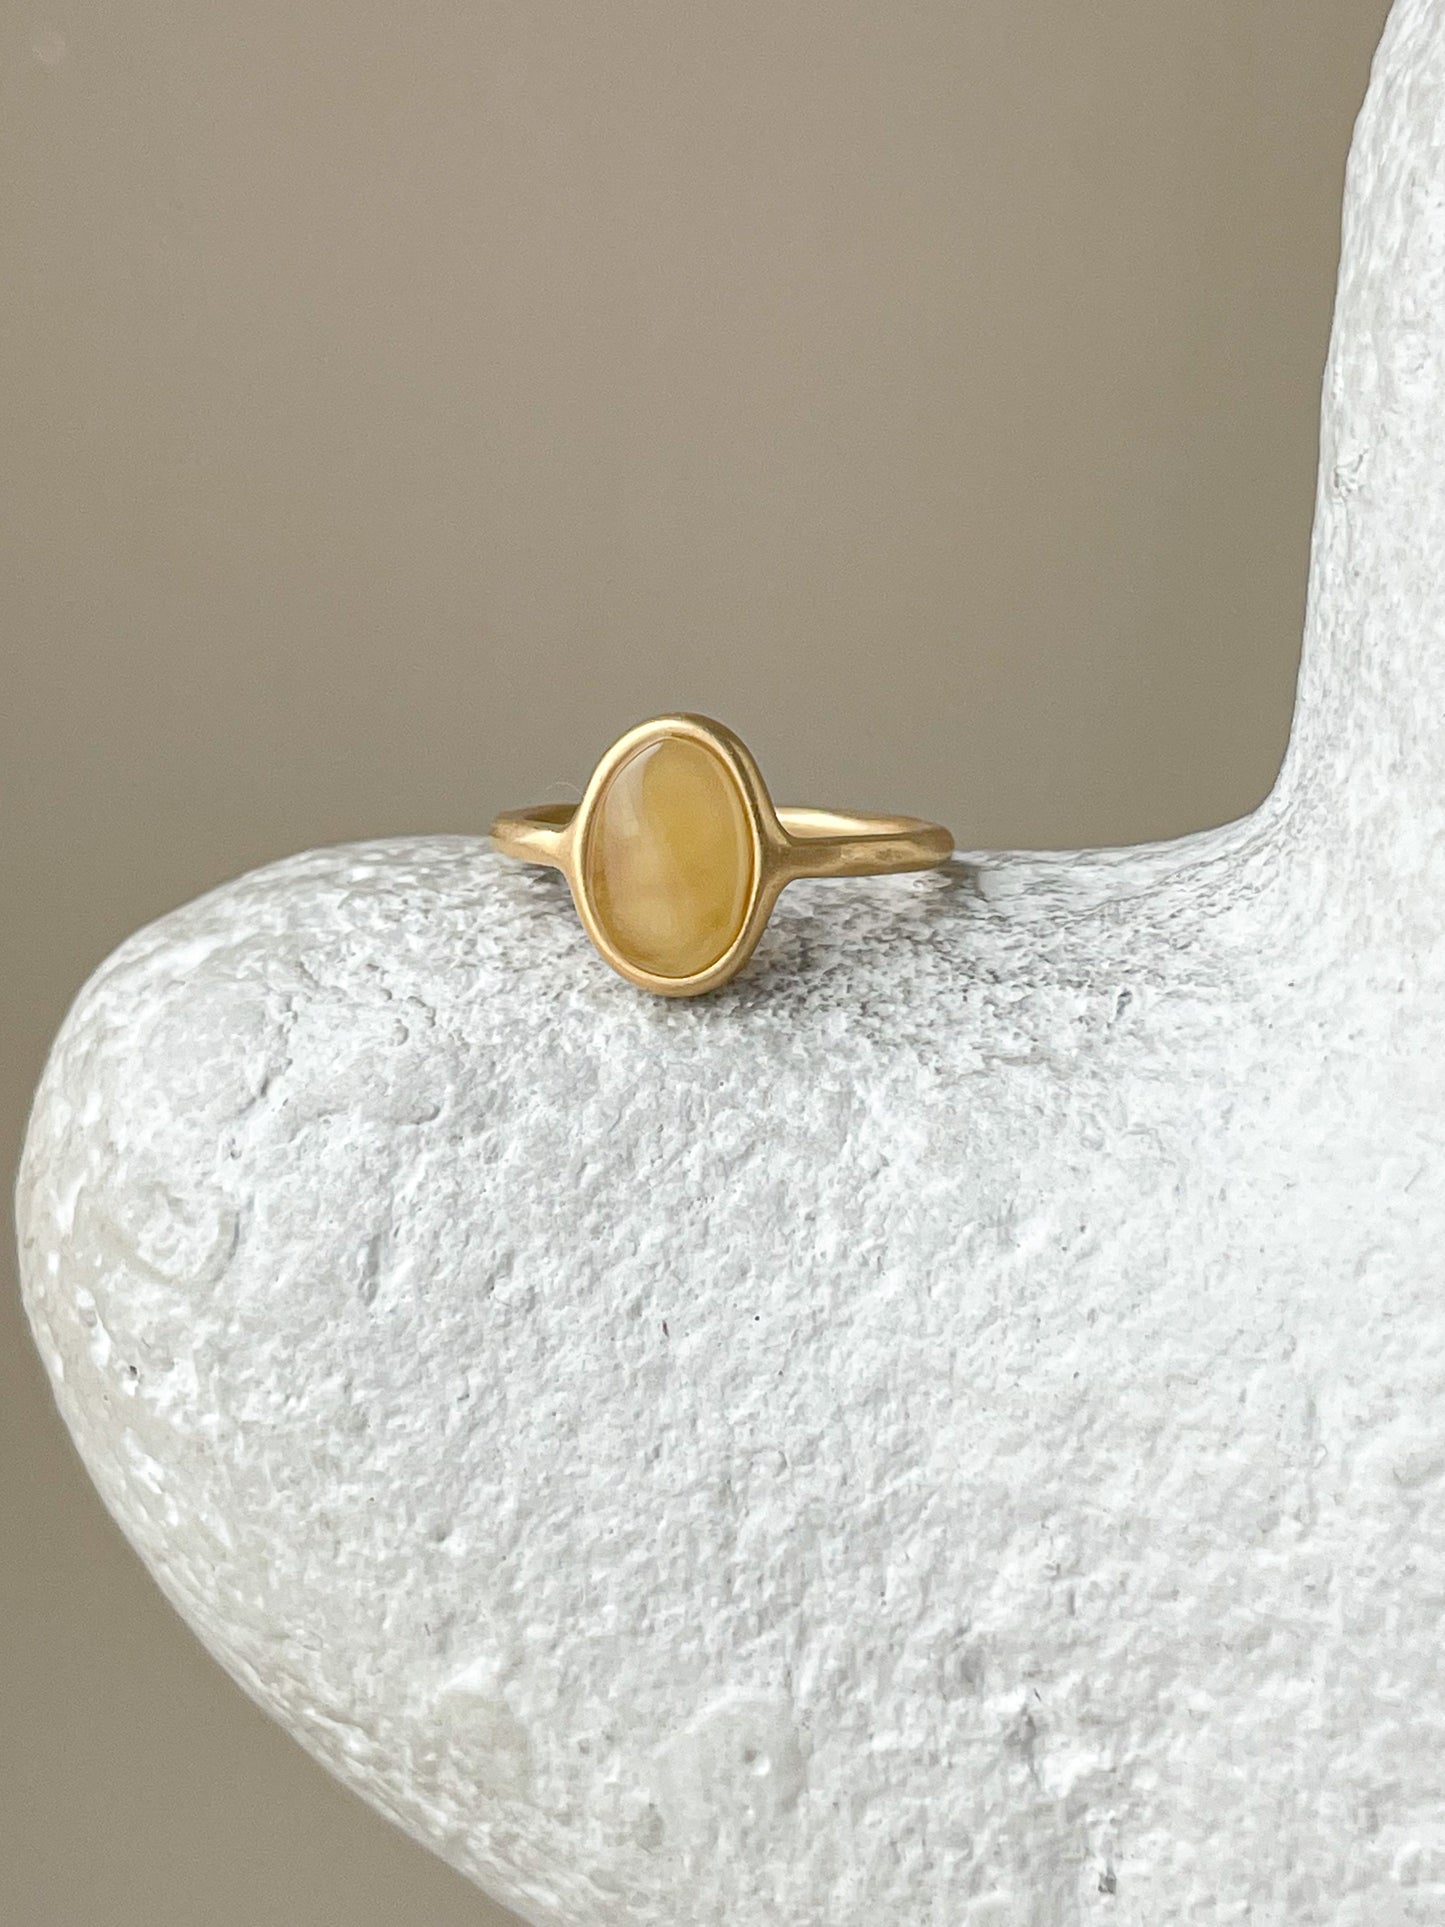 Matte amber ring - Gold plated silver - Thin ring collection- Size 5 1/2